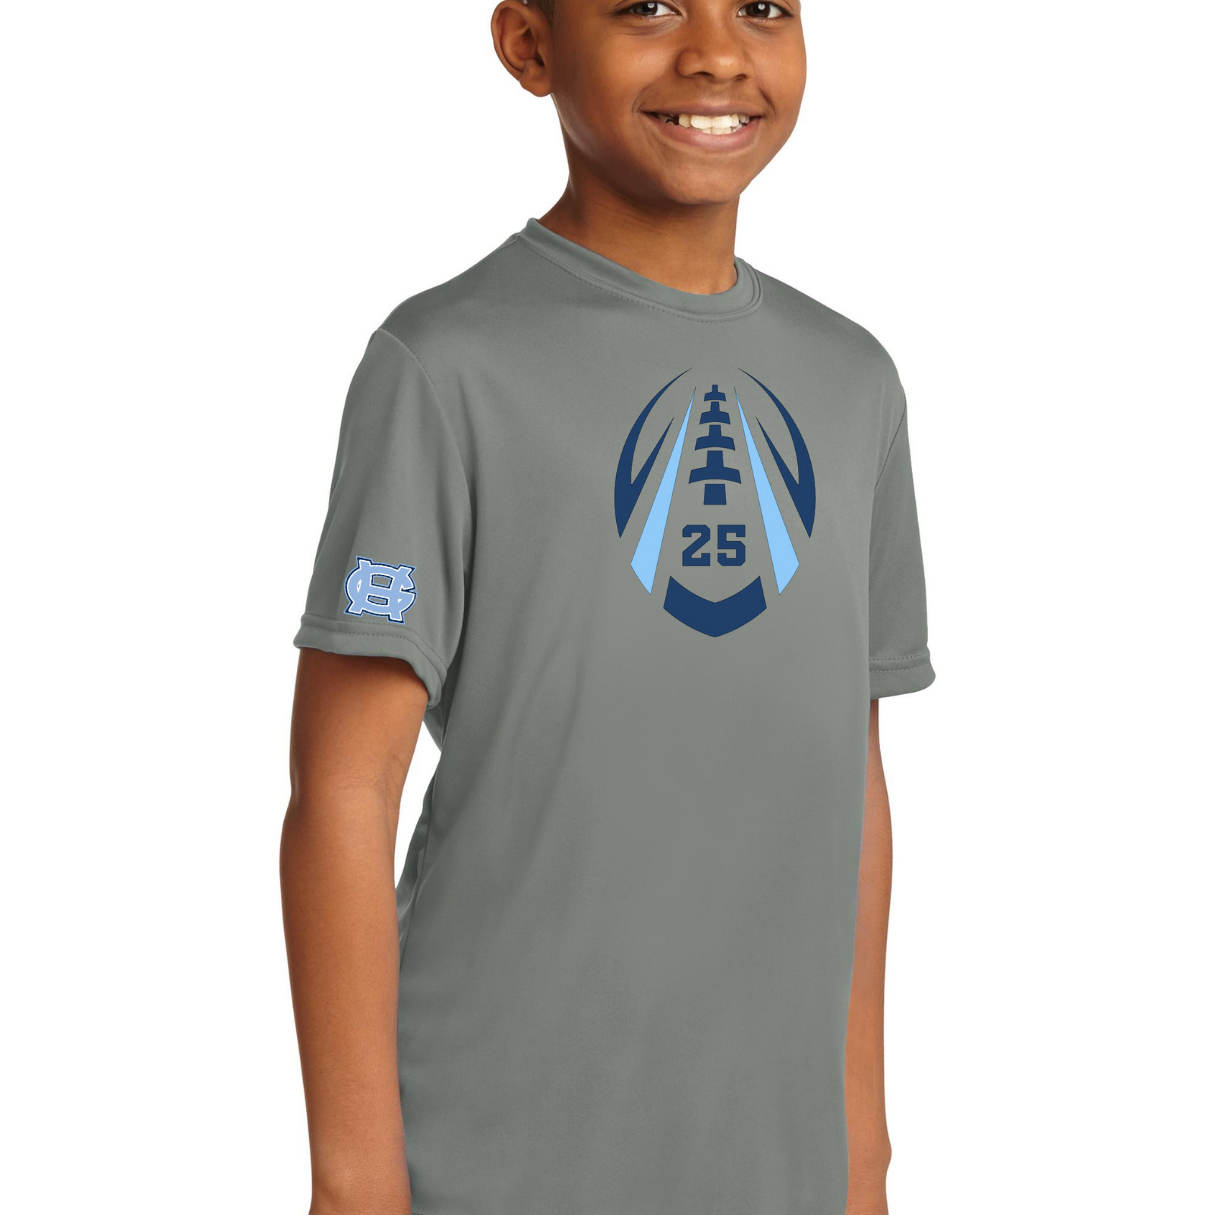 Tides Football Favorite Player Performance Tee - Adult and Youth